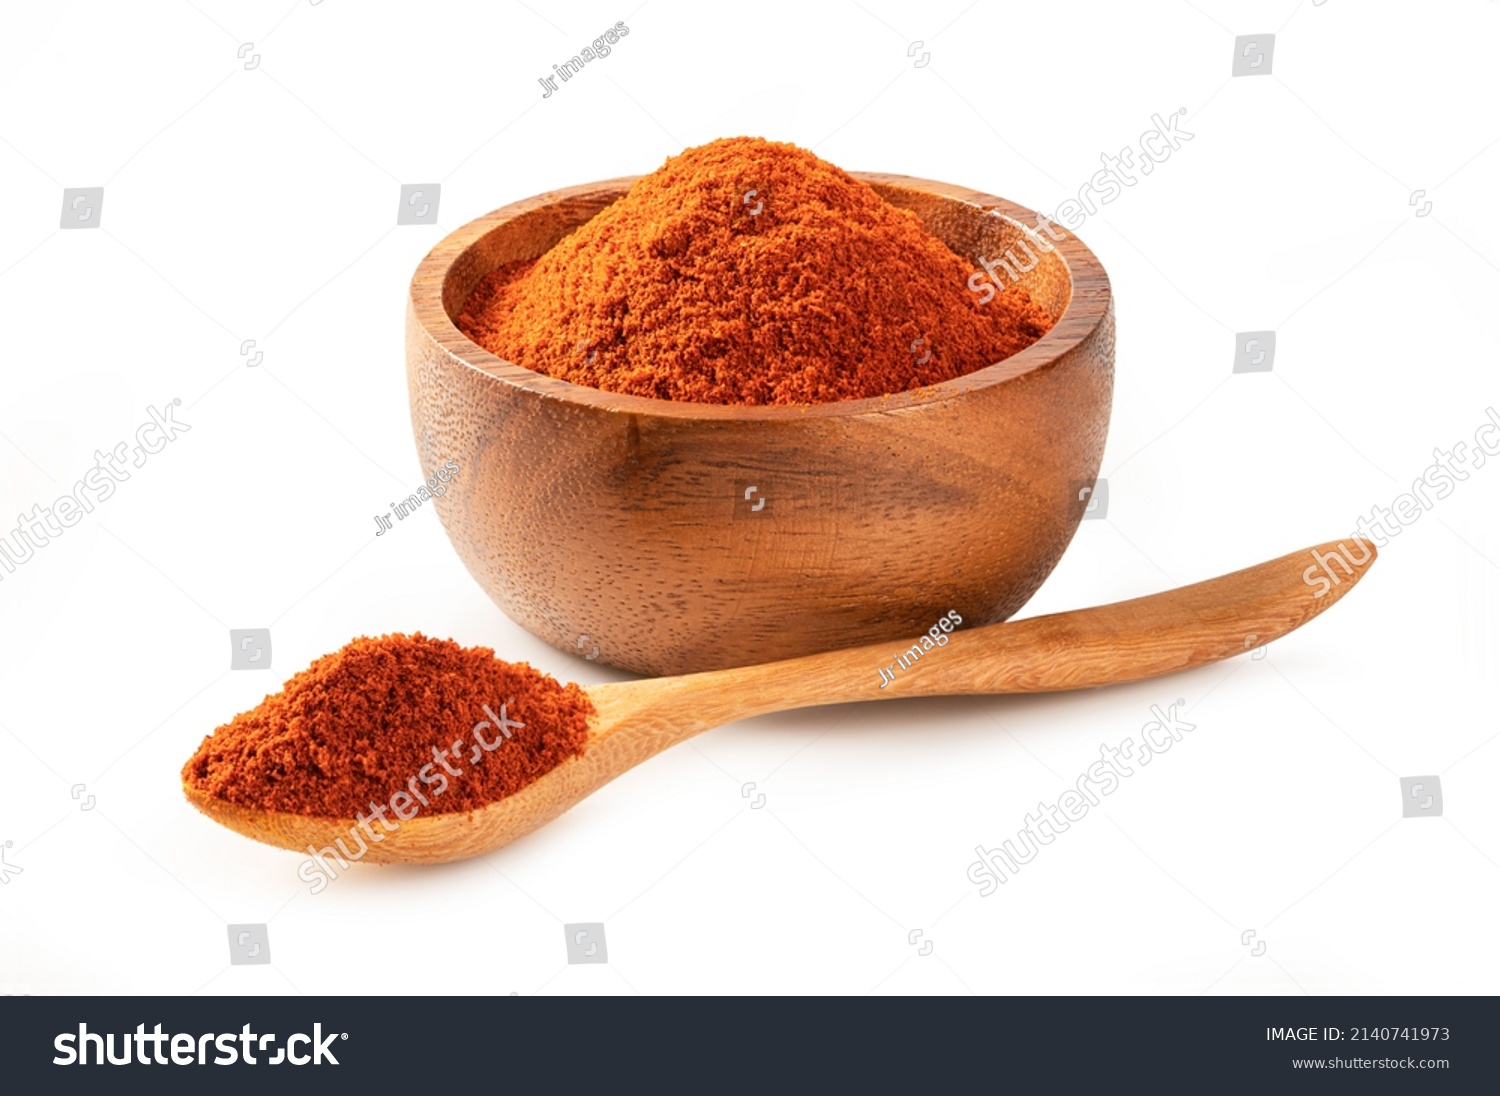 Paprika powder ( bell pepper) in wooden bowl and spoon isolated on white background. #2140741973